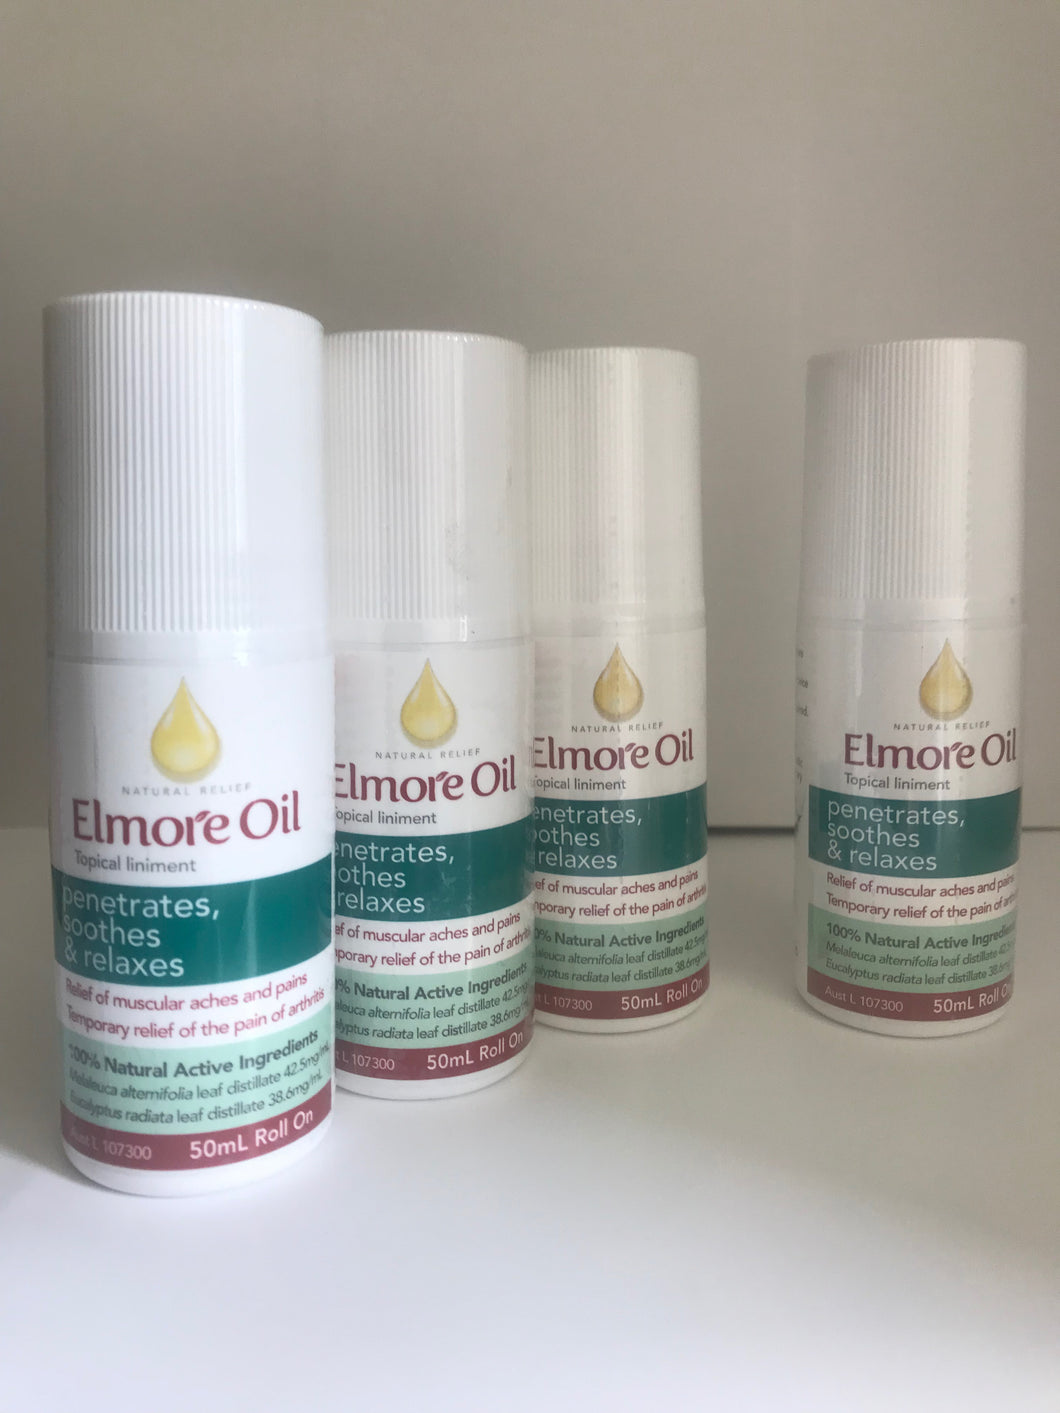 ELMORE OIL - ROLL ON 50ml - BUY 3 + GET 1 FREE - SAVE $ 21.95